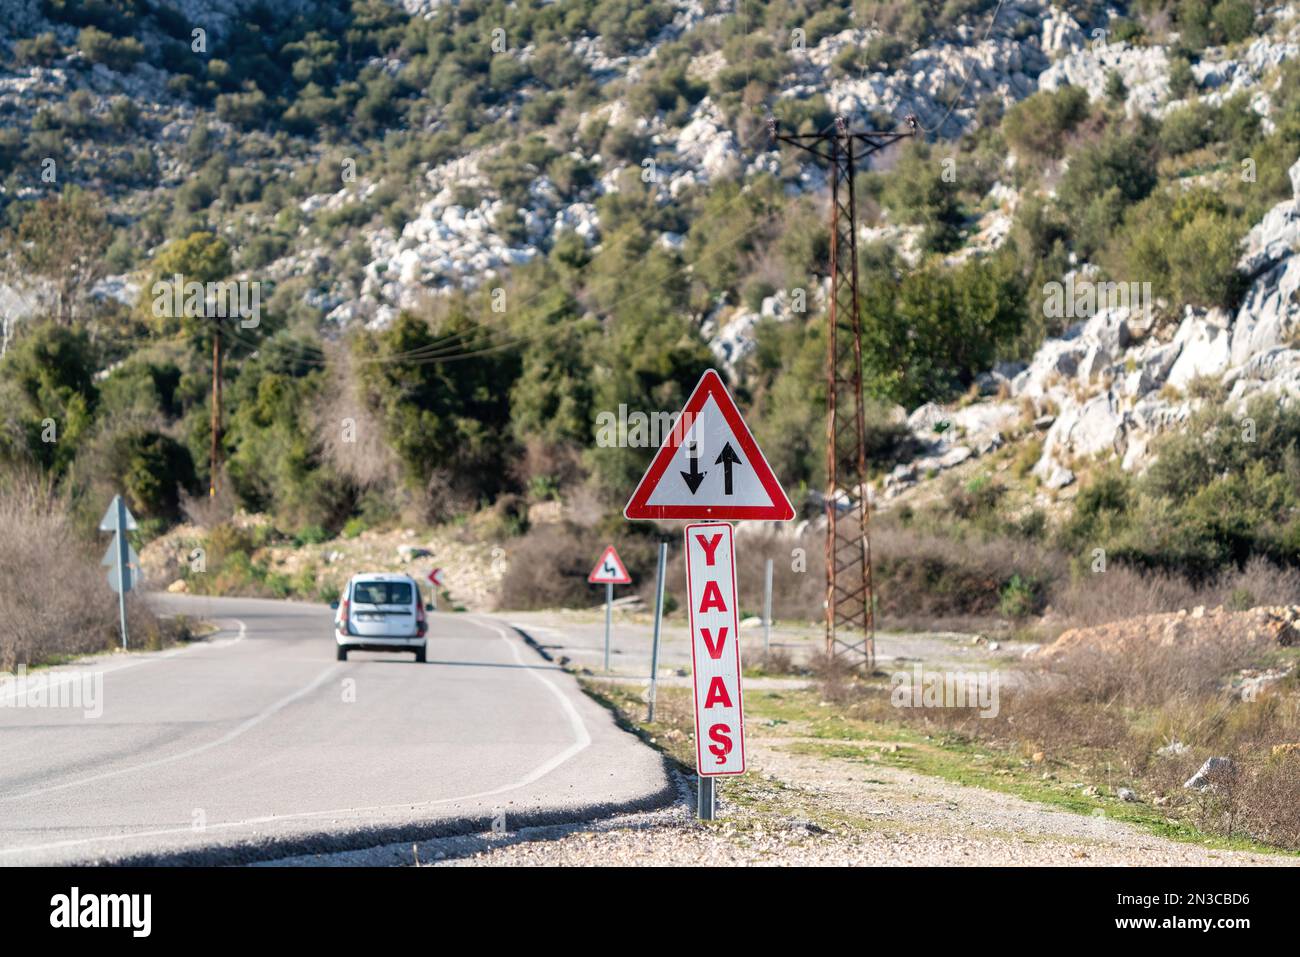 Slow on curve warning and two-way traffic sign Stock Photo